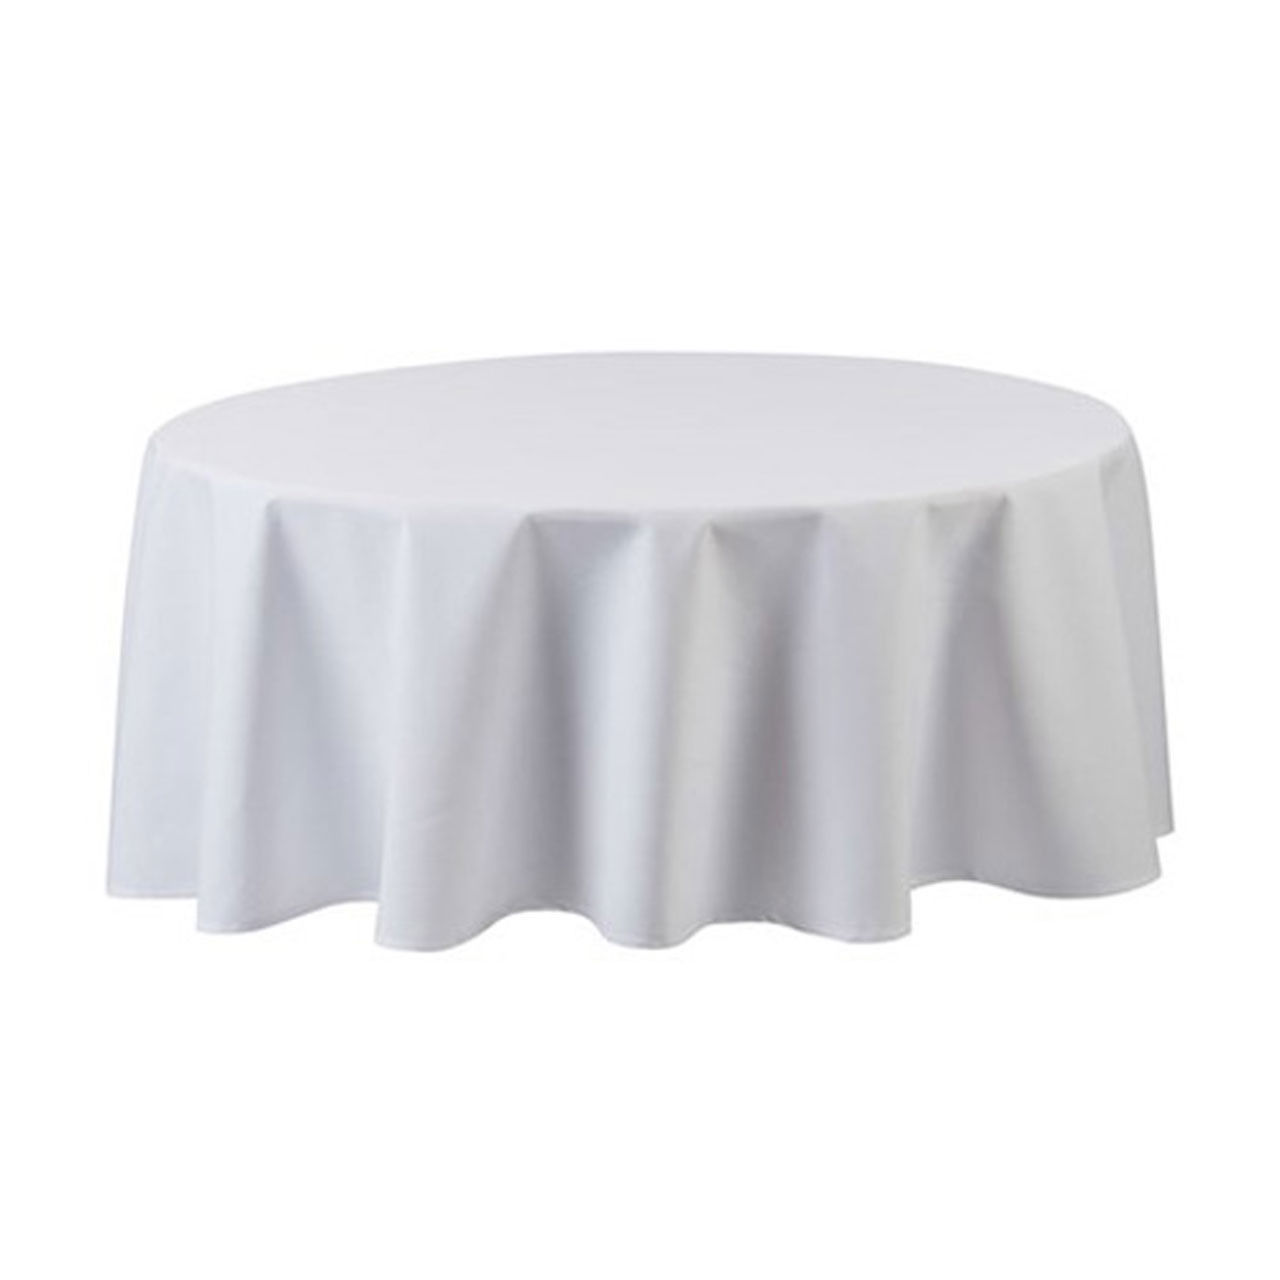 What material is used for the 120 round tablecloth?